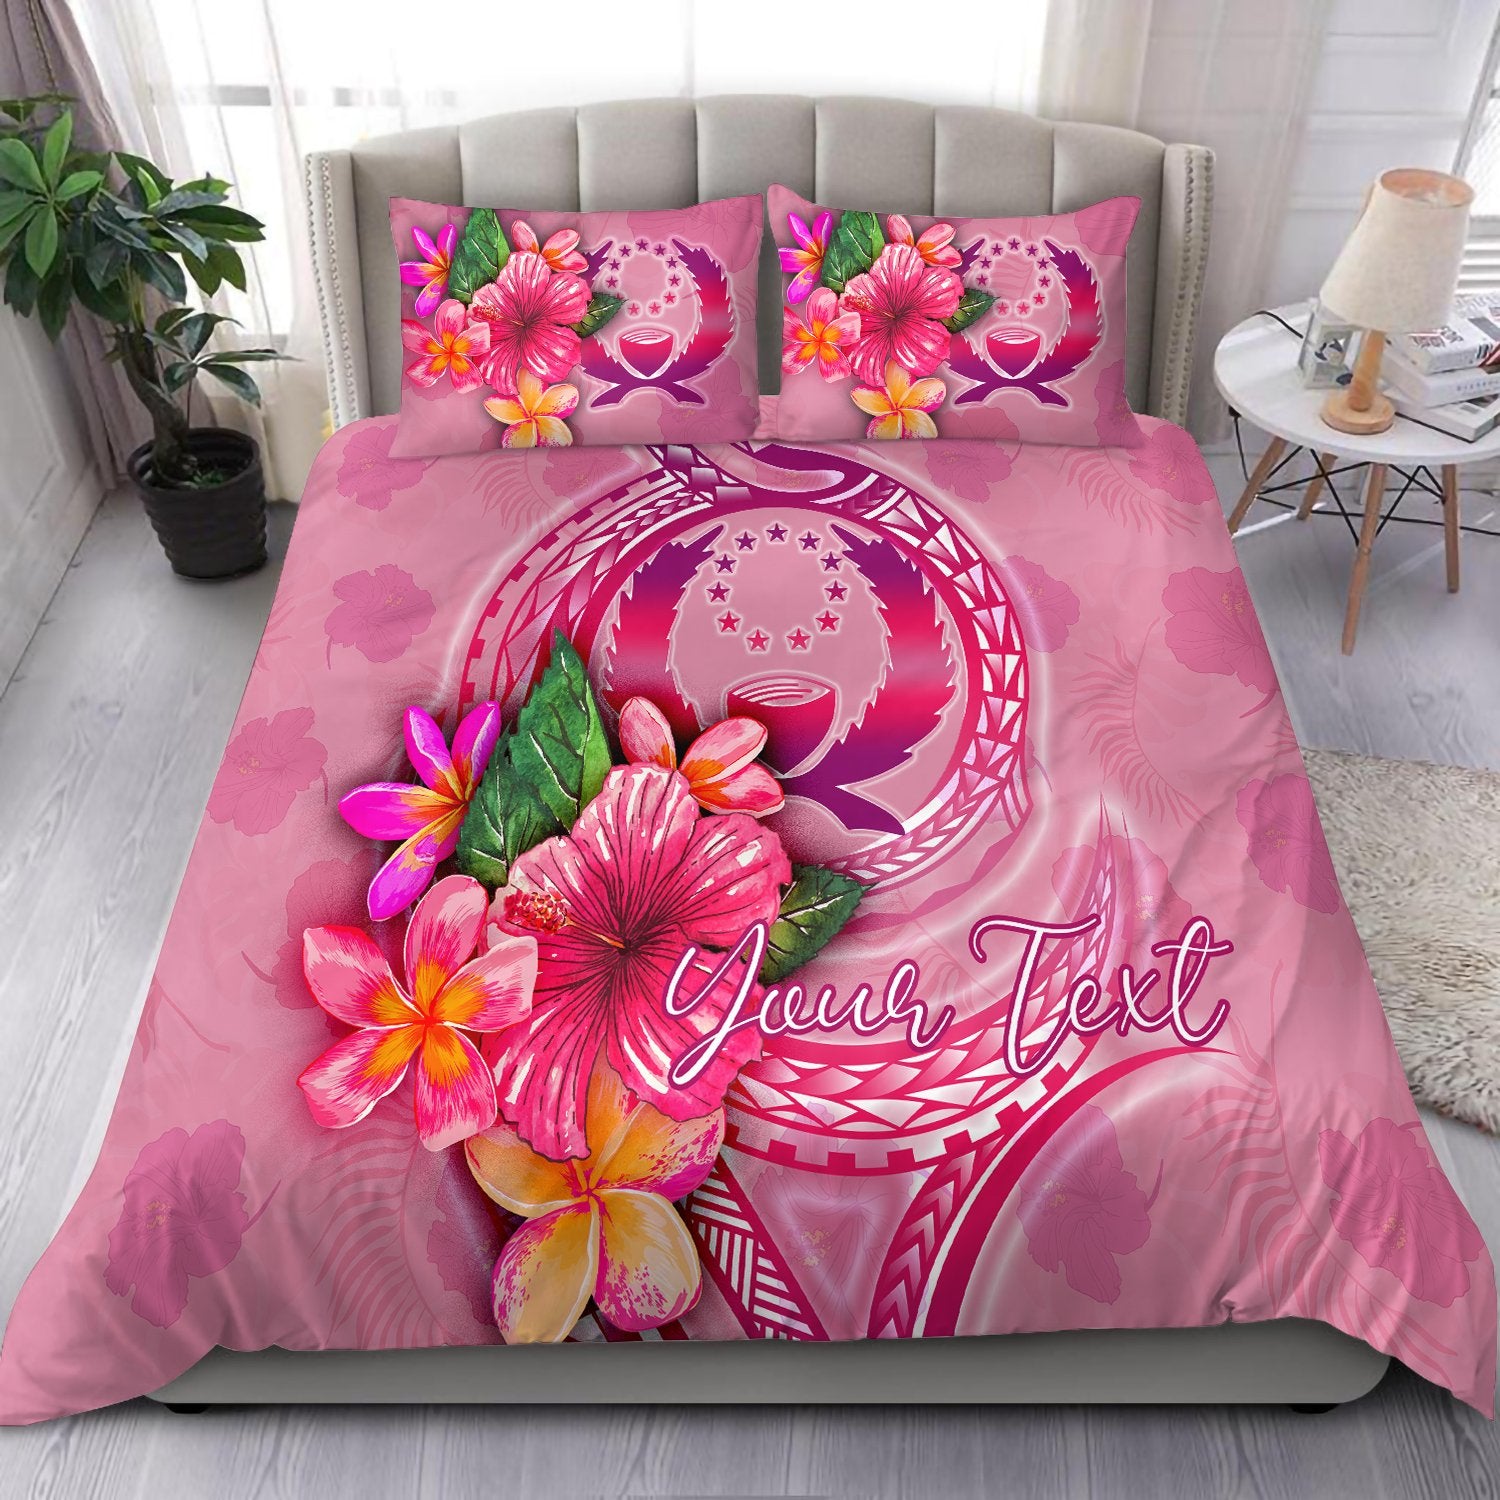 Pohnpei Polynesian Custom Personalised Bedding Set - Floral With Seal Pink pink - Polynesian Pride